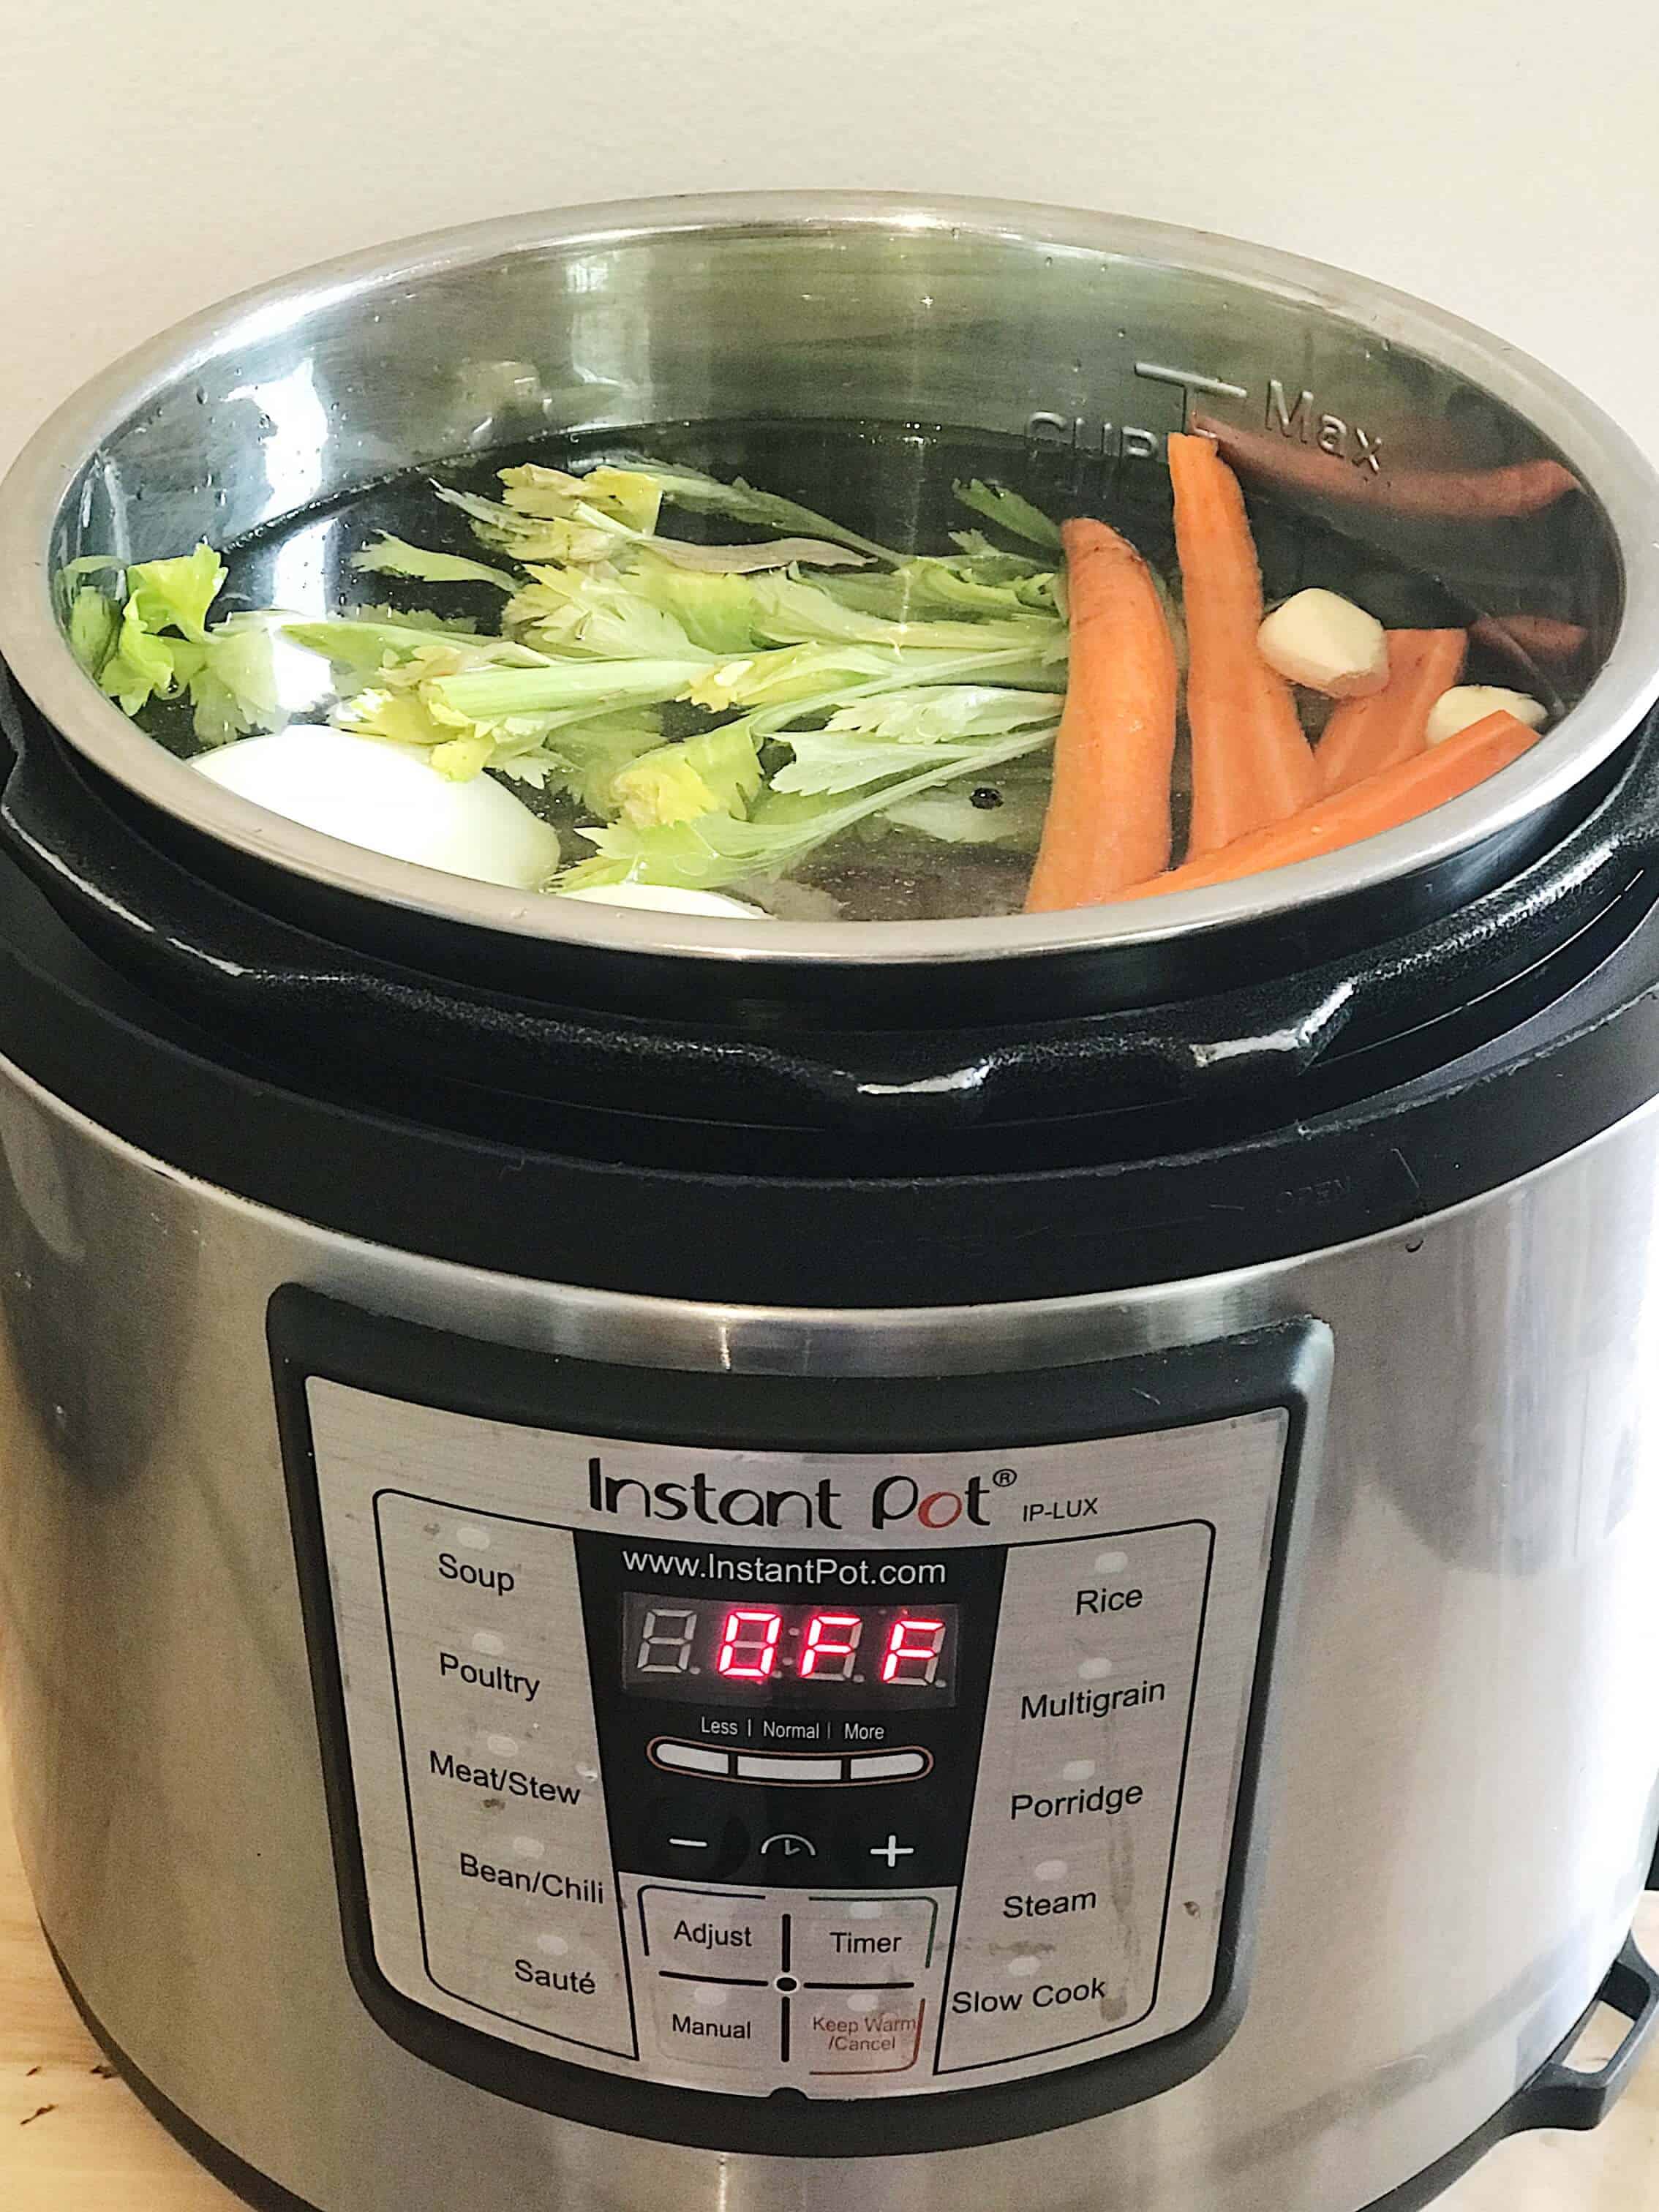 Instant Pot Chicken Stock ingredients inside of the pot filled with water before cooking